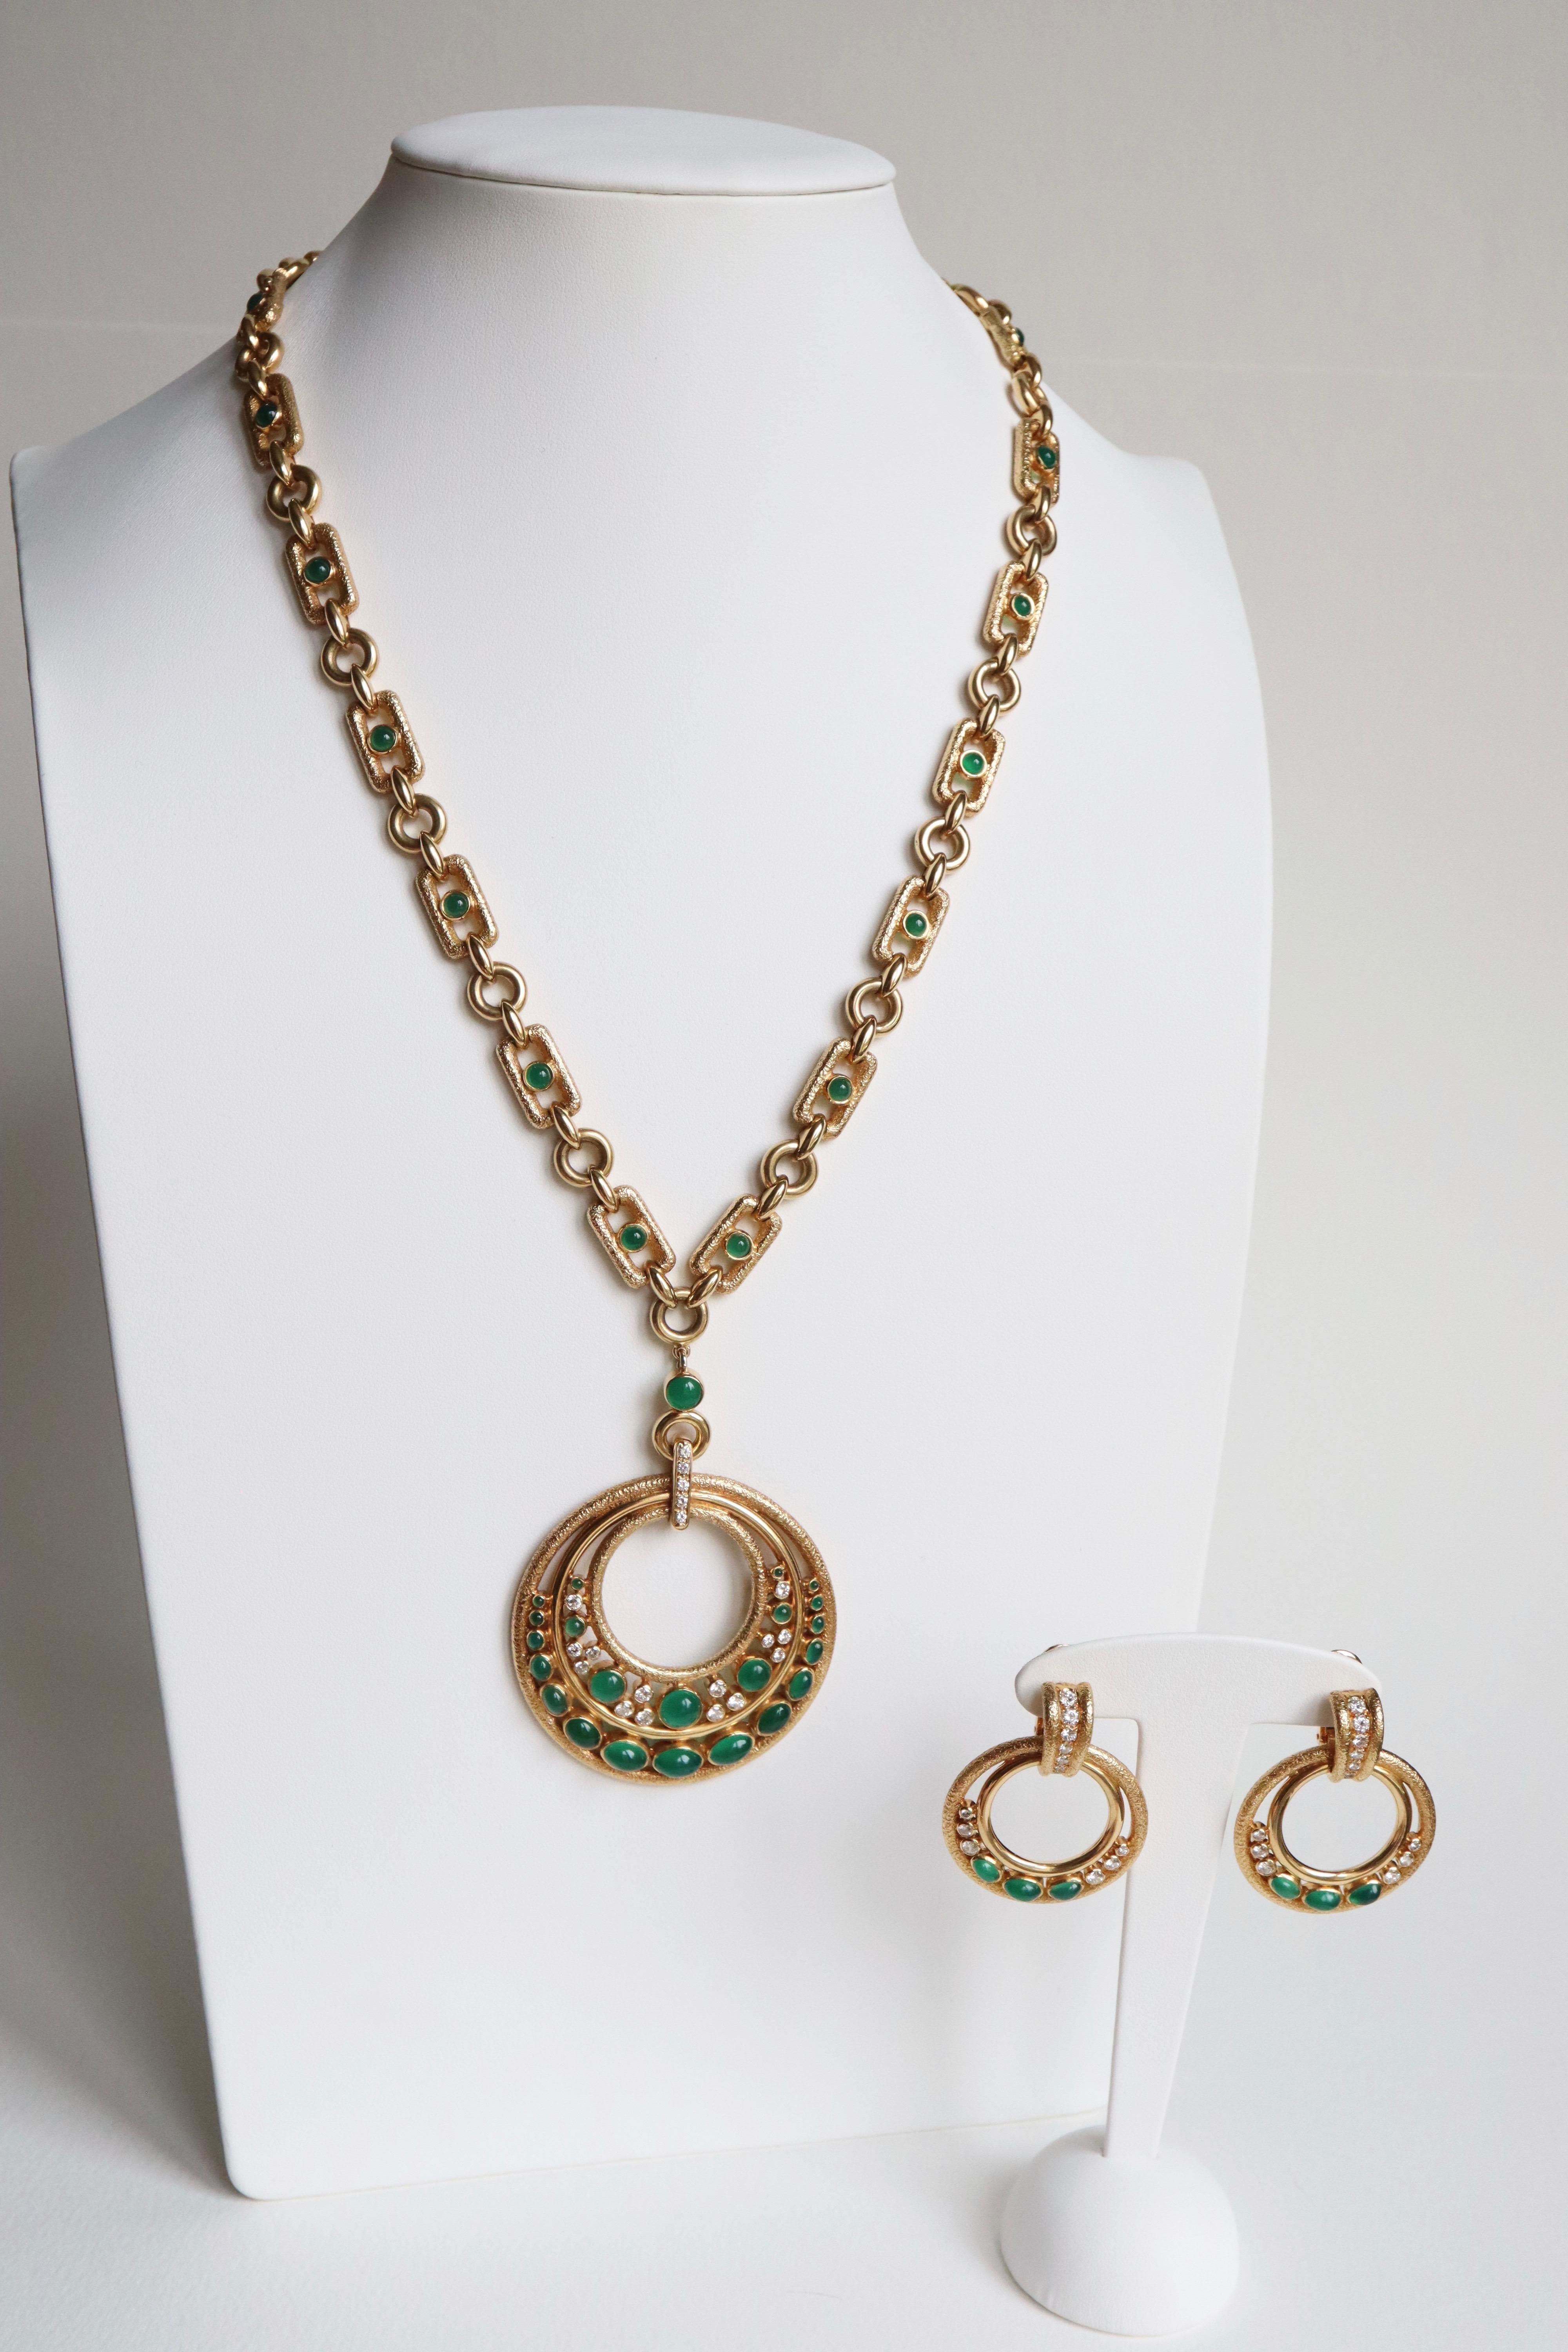 MAUBOUSSIN set: Textured 18 Carat yellow Gold rectangular Link Necklace, enhanced with Chrysoprases and Diamonds for more than one Carat, with a removable round Pendant decorated with Chrysoprases and Brilliant-cut Diamonds set with Crimps. 
The